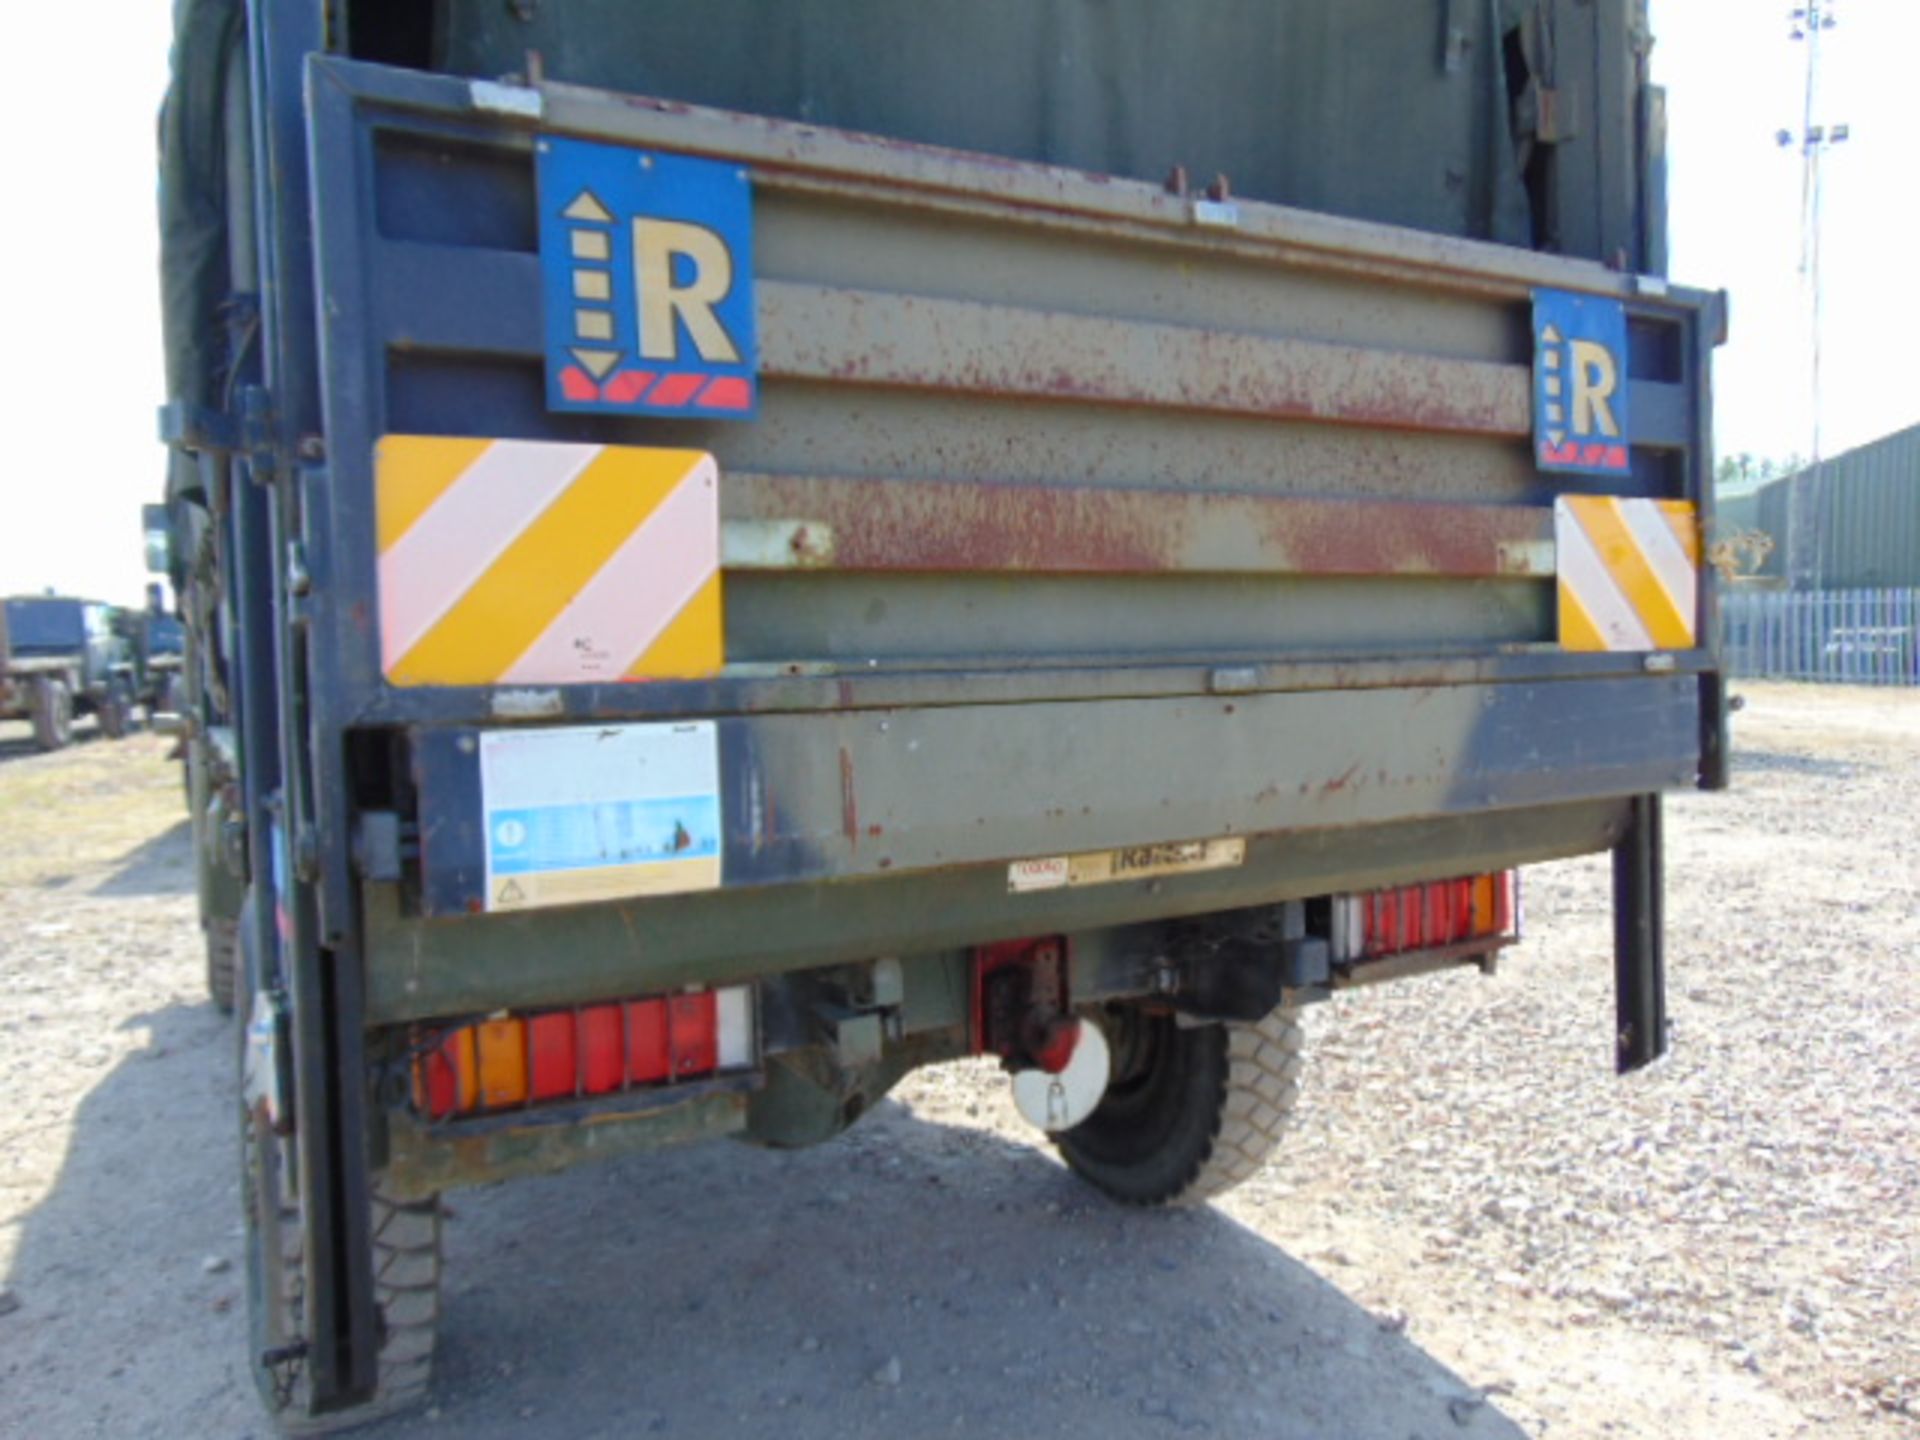 Leyland Daf 45/150 4 x 4 with Ratcliff 1000Kg Tail Lift - Image 9 of 17